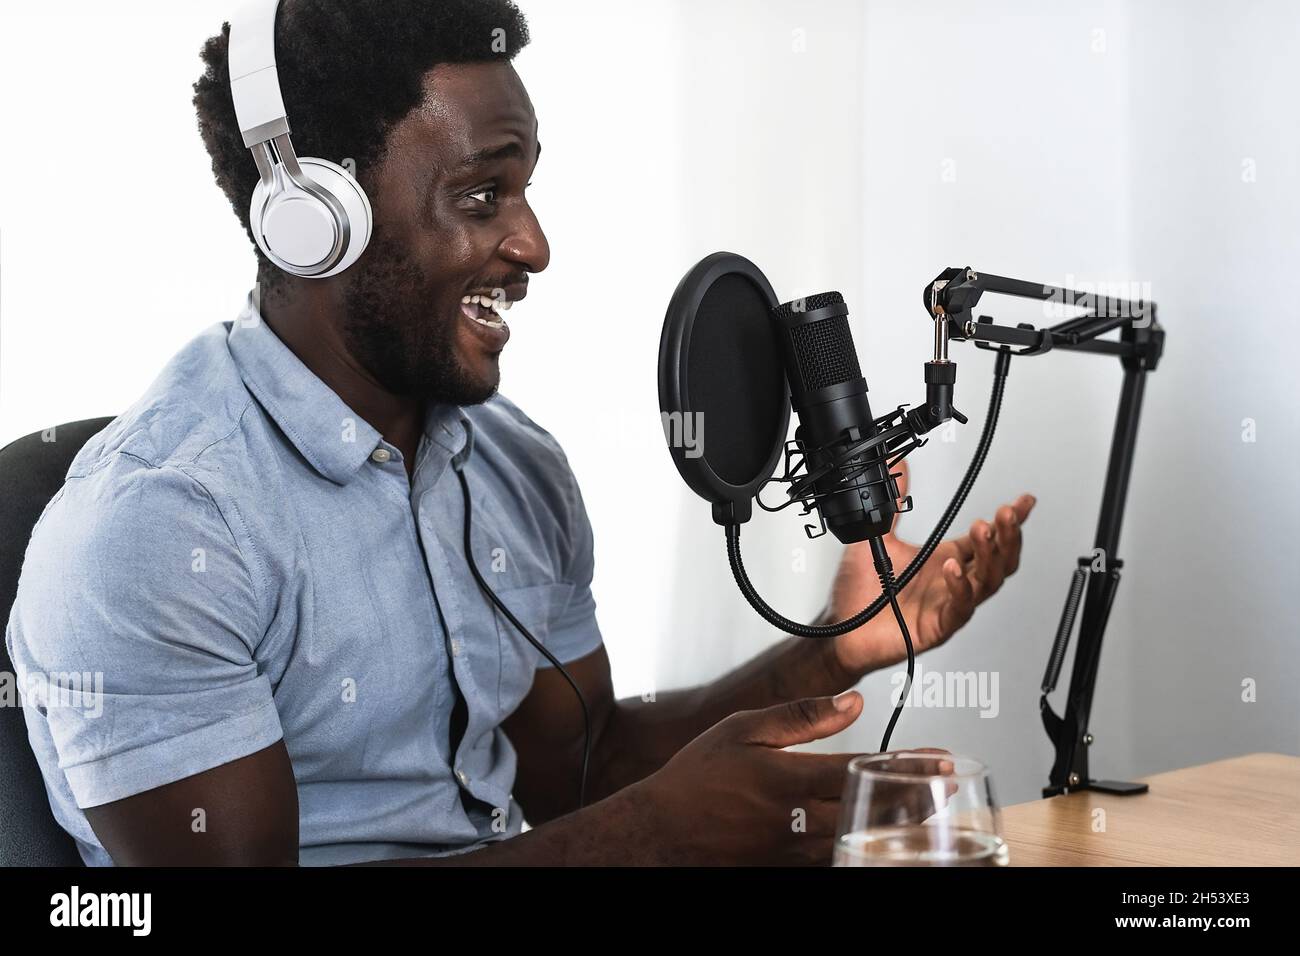 African man recording a podcast using microphone and headphones from his home studio Stock Photo